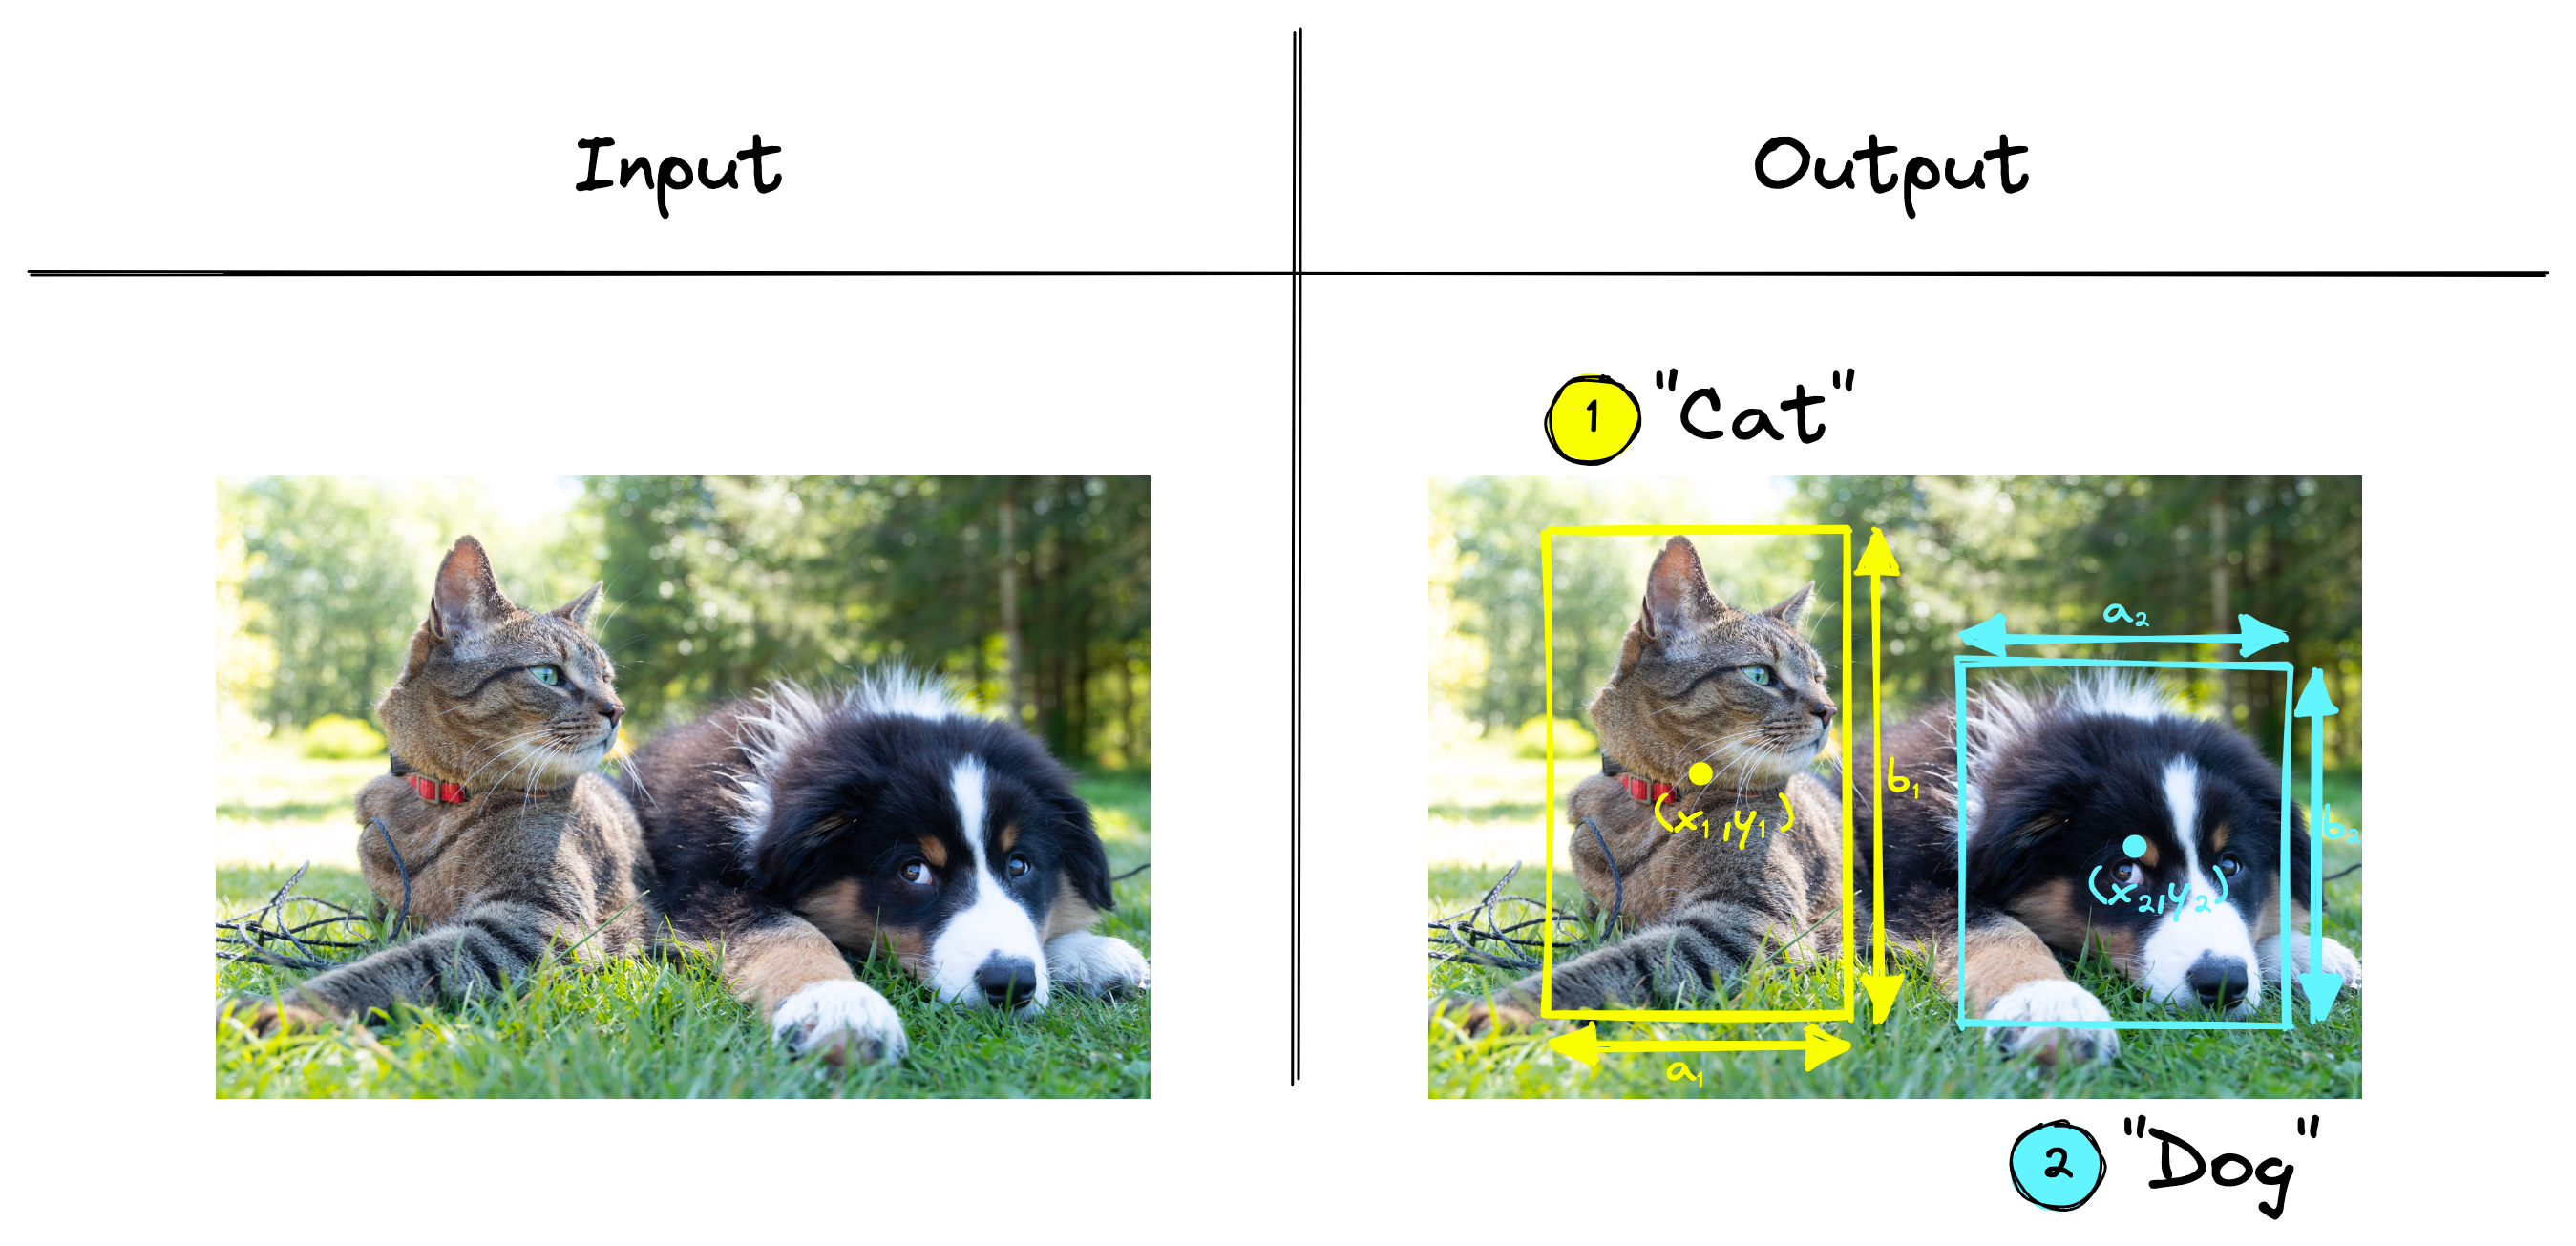 (1) Object localized and classified as "cat" and (2) object localized and classified as "dog".